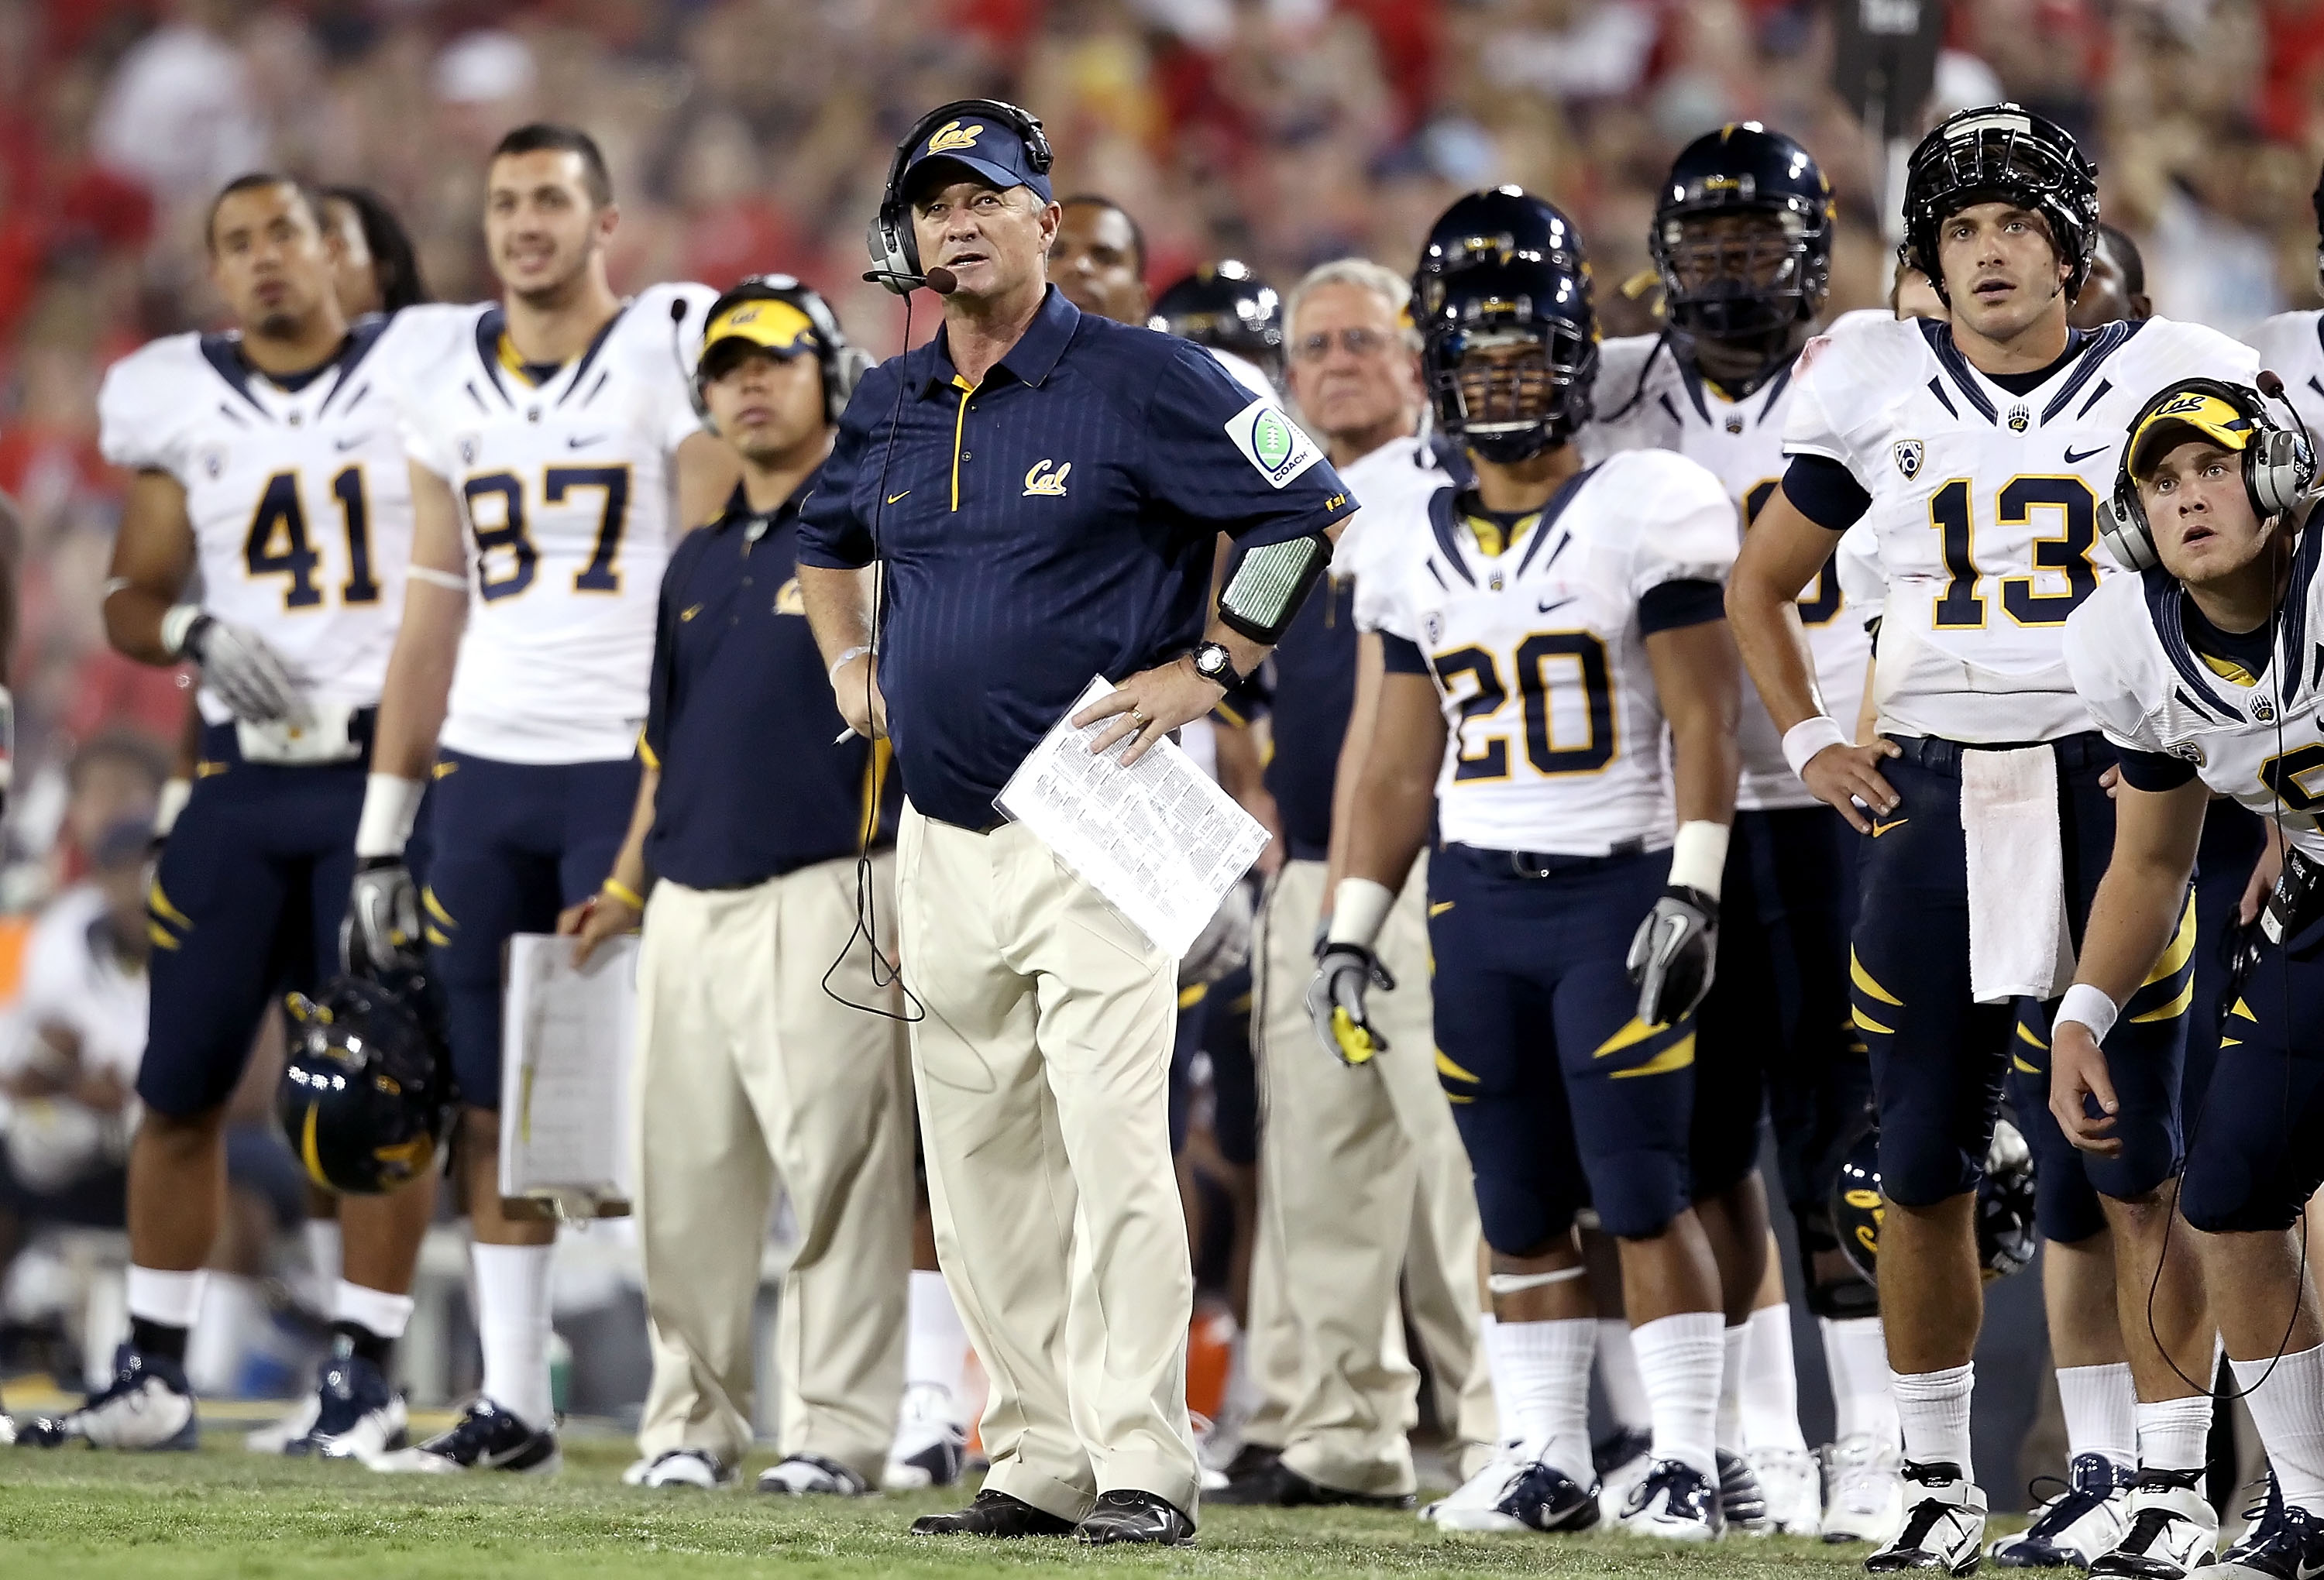 TUCSON, AZ - SEPTEMBER 25:  Head coach Jeff Tedford of the California Golden Bears watches as his team misses a 33 yard field goal during the third quarter of the college football game against the Arizona Wildcats at Arizona Stadium on September 25, 2010